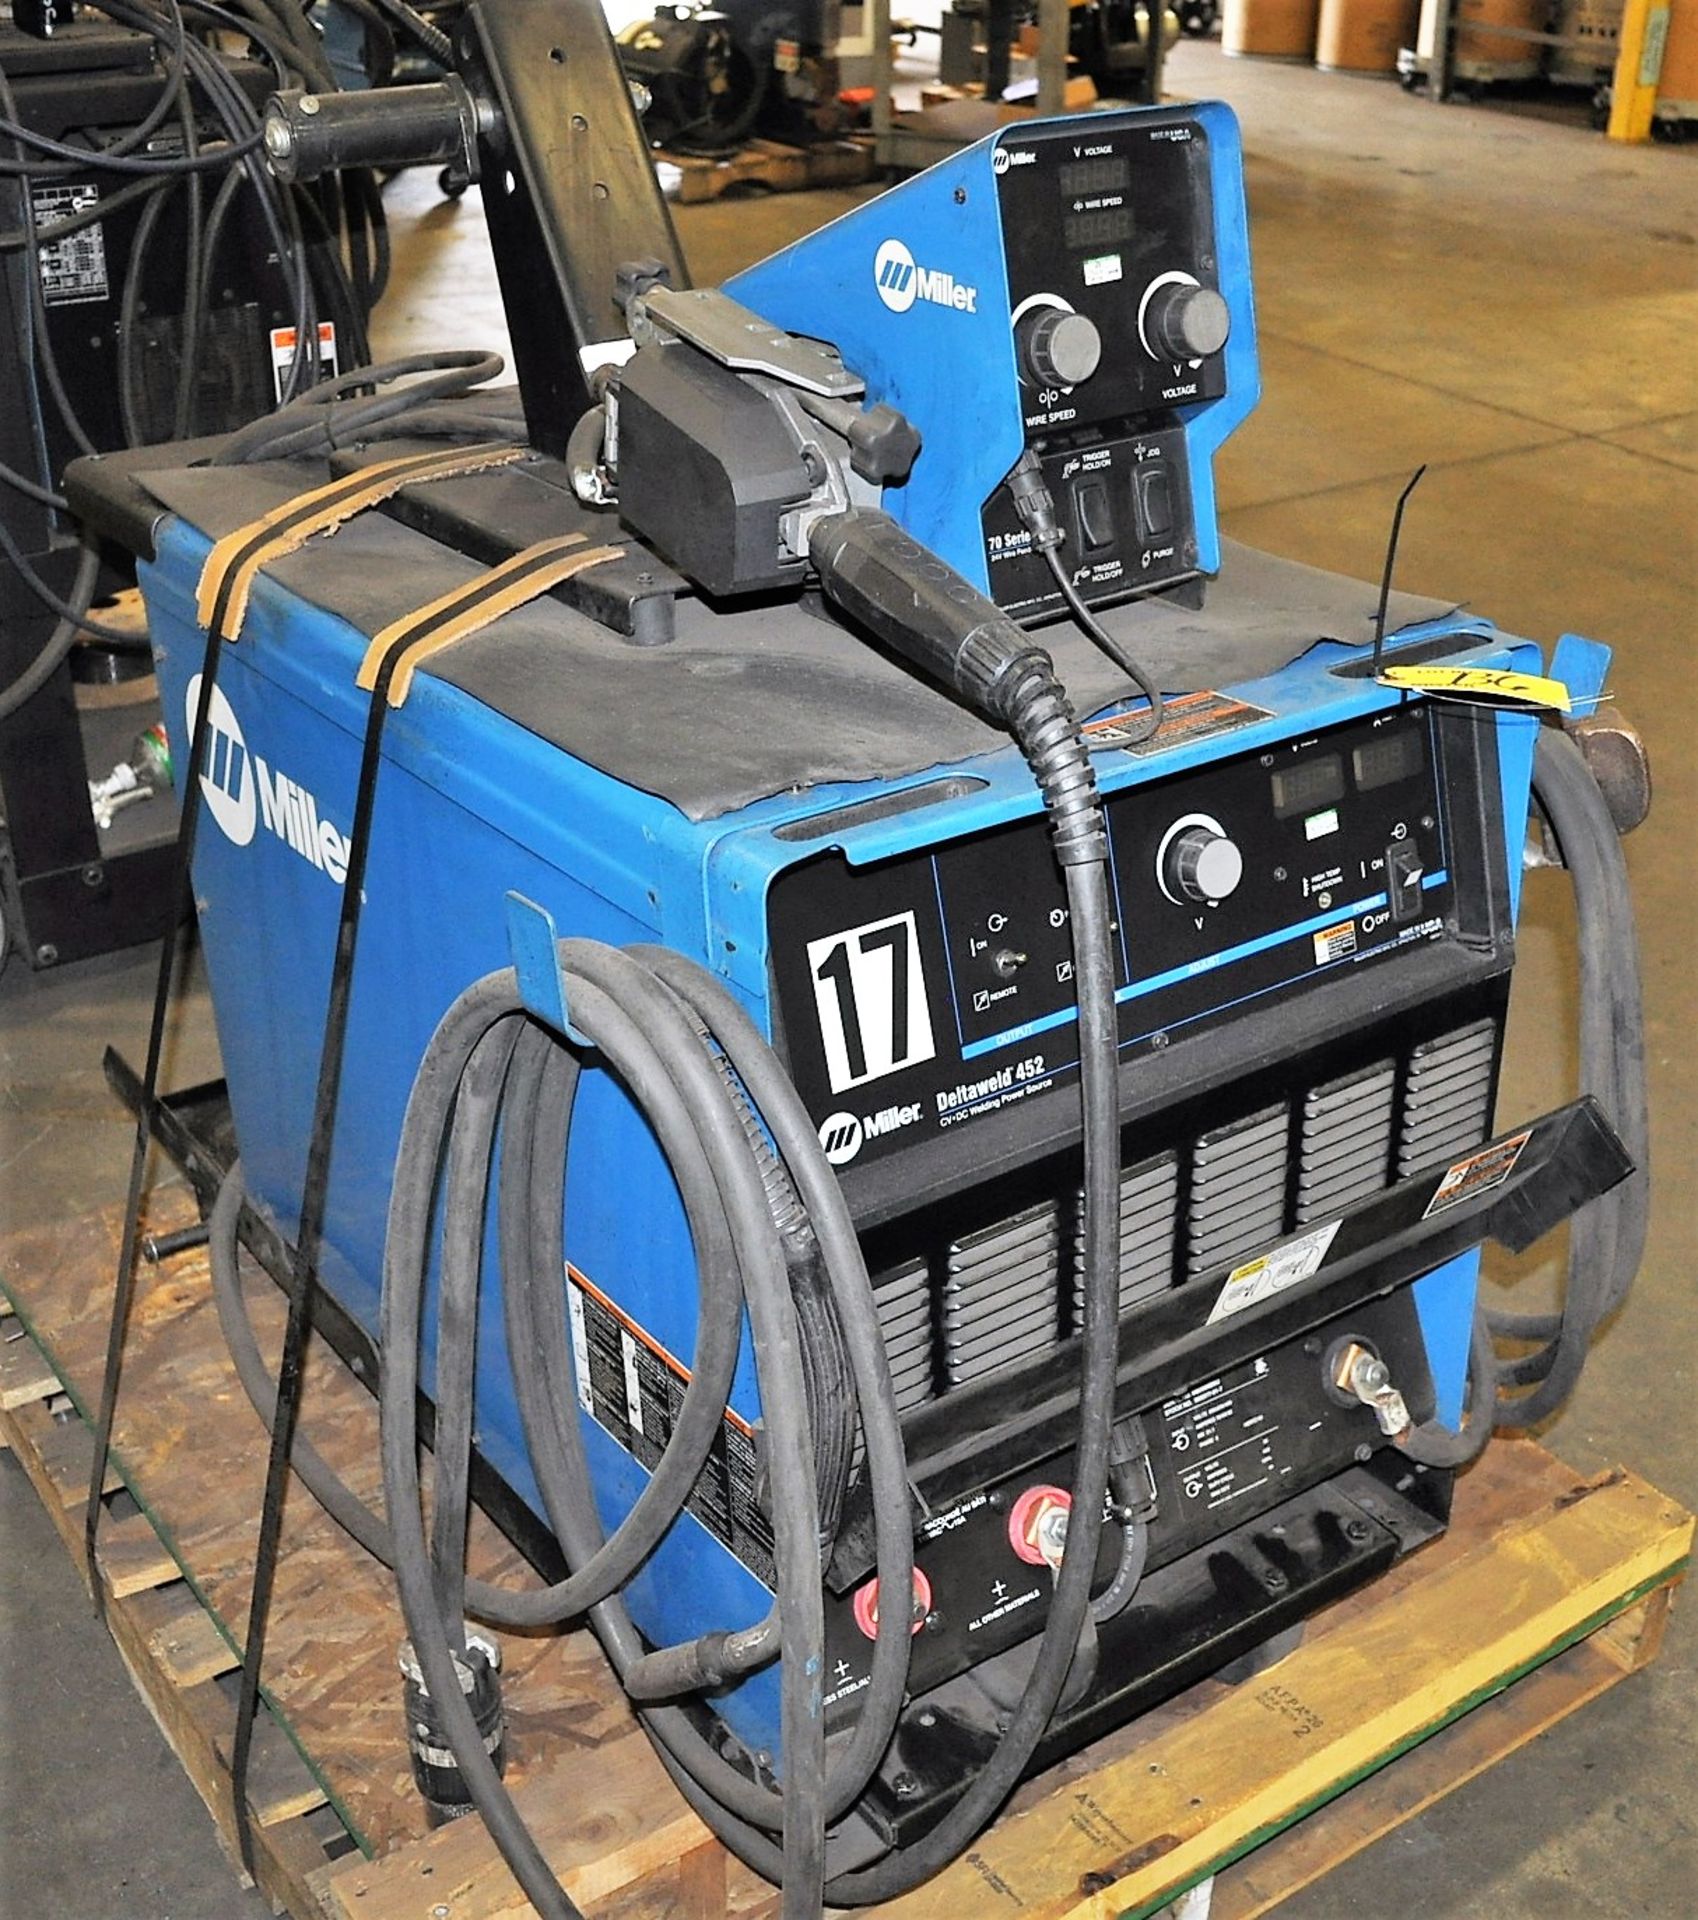 MILLER DELTAWELD 452 CV/DC 450-AMP WELDING POWER SOURCE, WITH MILLER 70 SERIES WIRE FEED, S/N: - Image 2 of 3